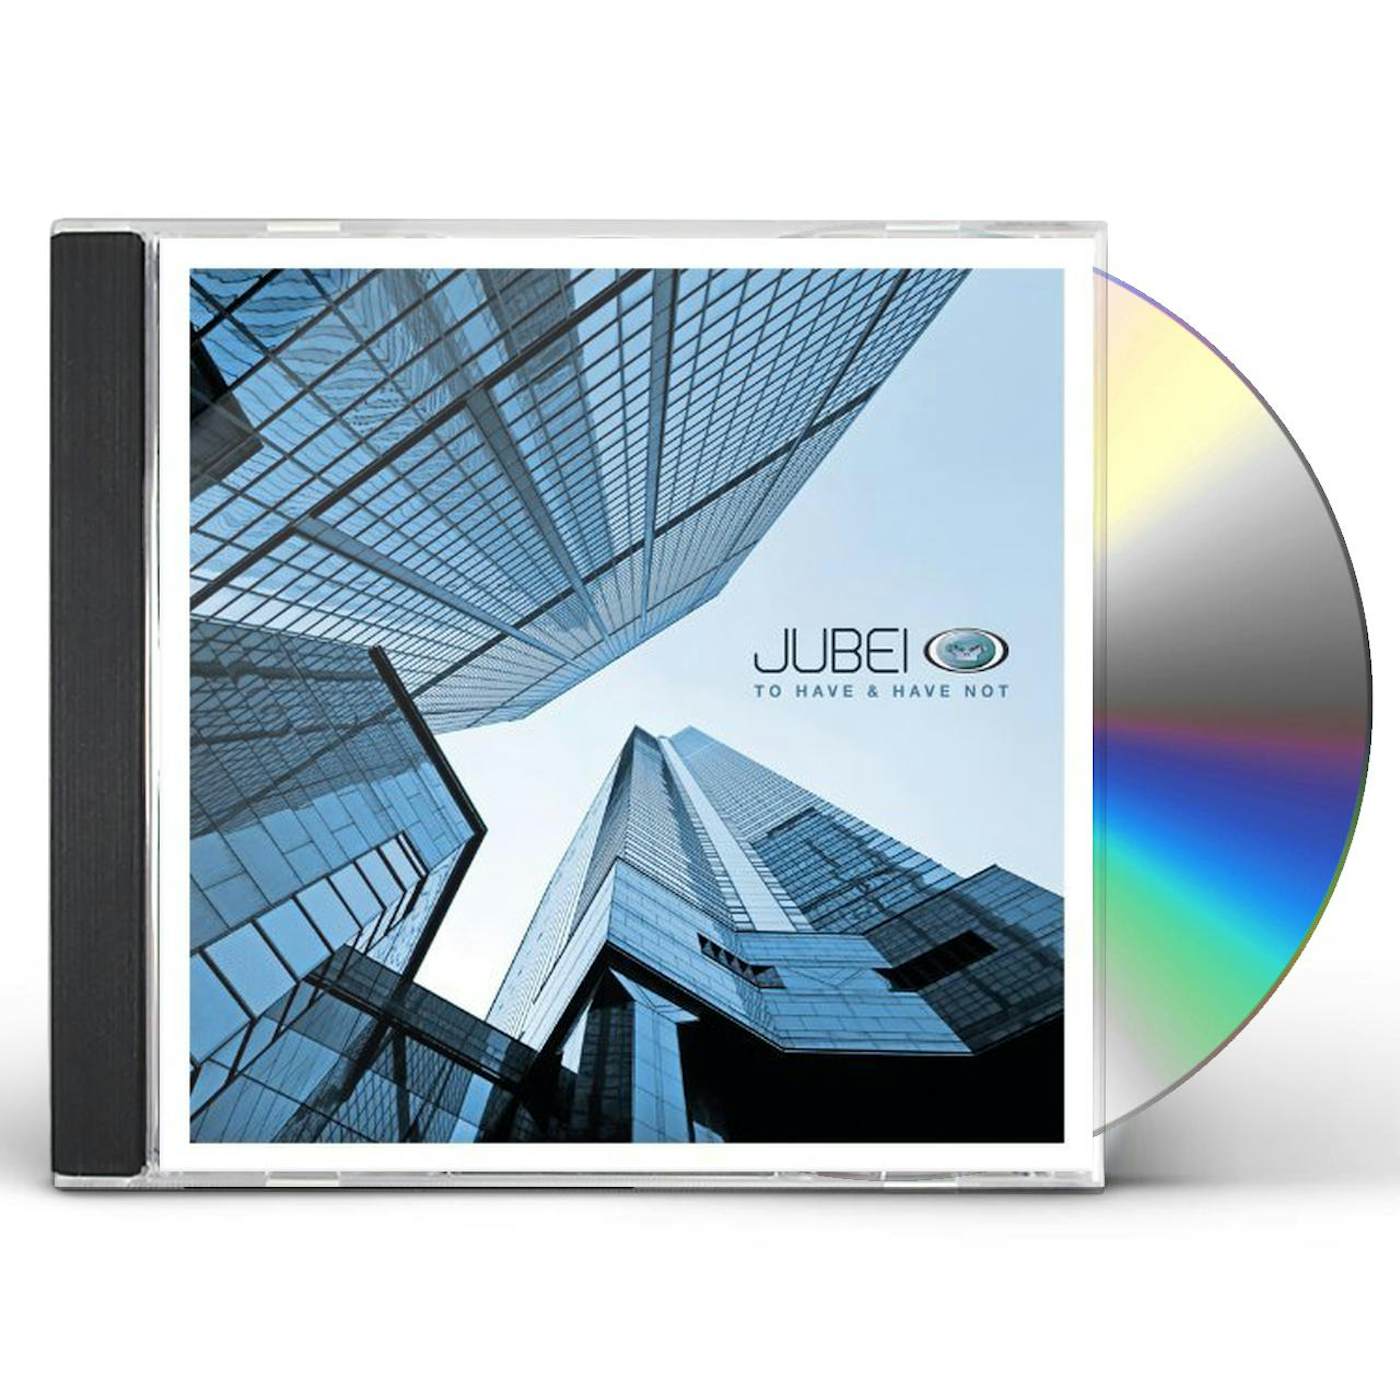 Jubei TO HAVE & HAVE NOT CD